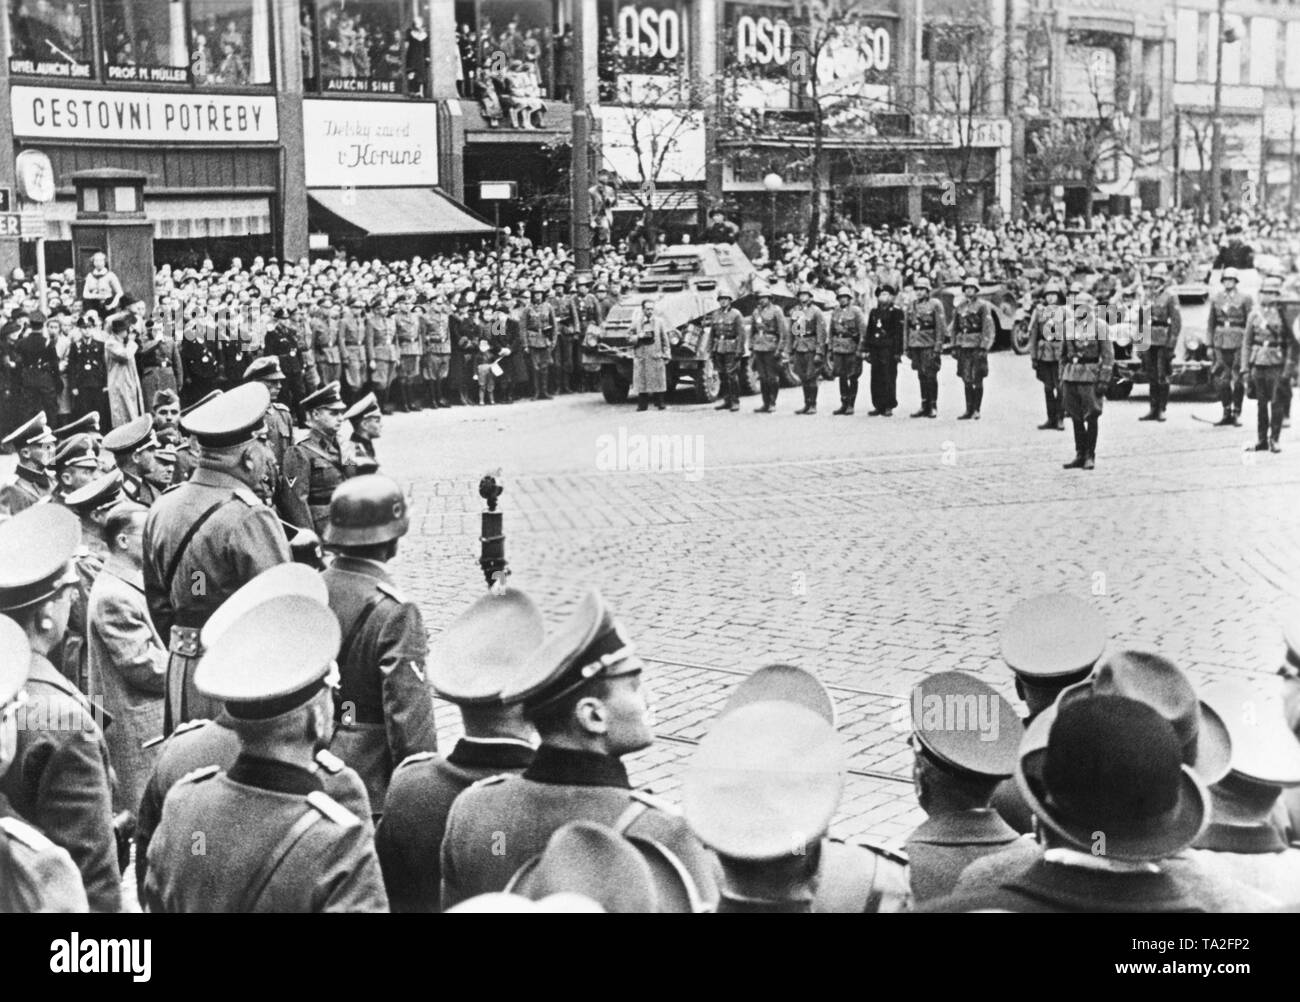 Greeting of the SS Leibstandarte (Guard of Corps) by Reichprotector of Bohemia and Moravia Konstantin von Neurath at Wenceslas Square in Prague. The troops return to Prague from a deployment on the Eastern Front. Hitler starts the Second World War by attacking Poland in September. Stock Photo